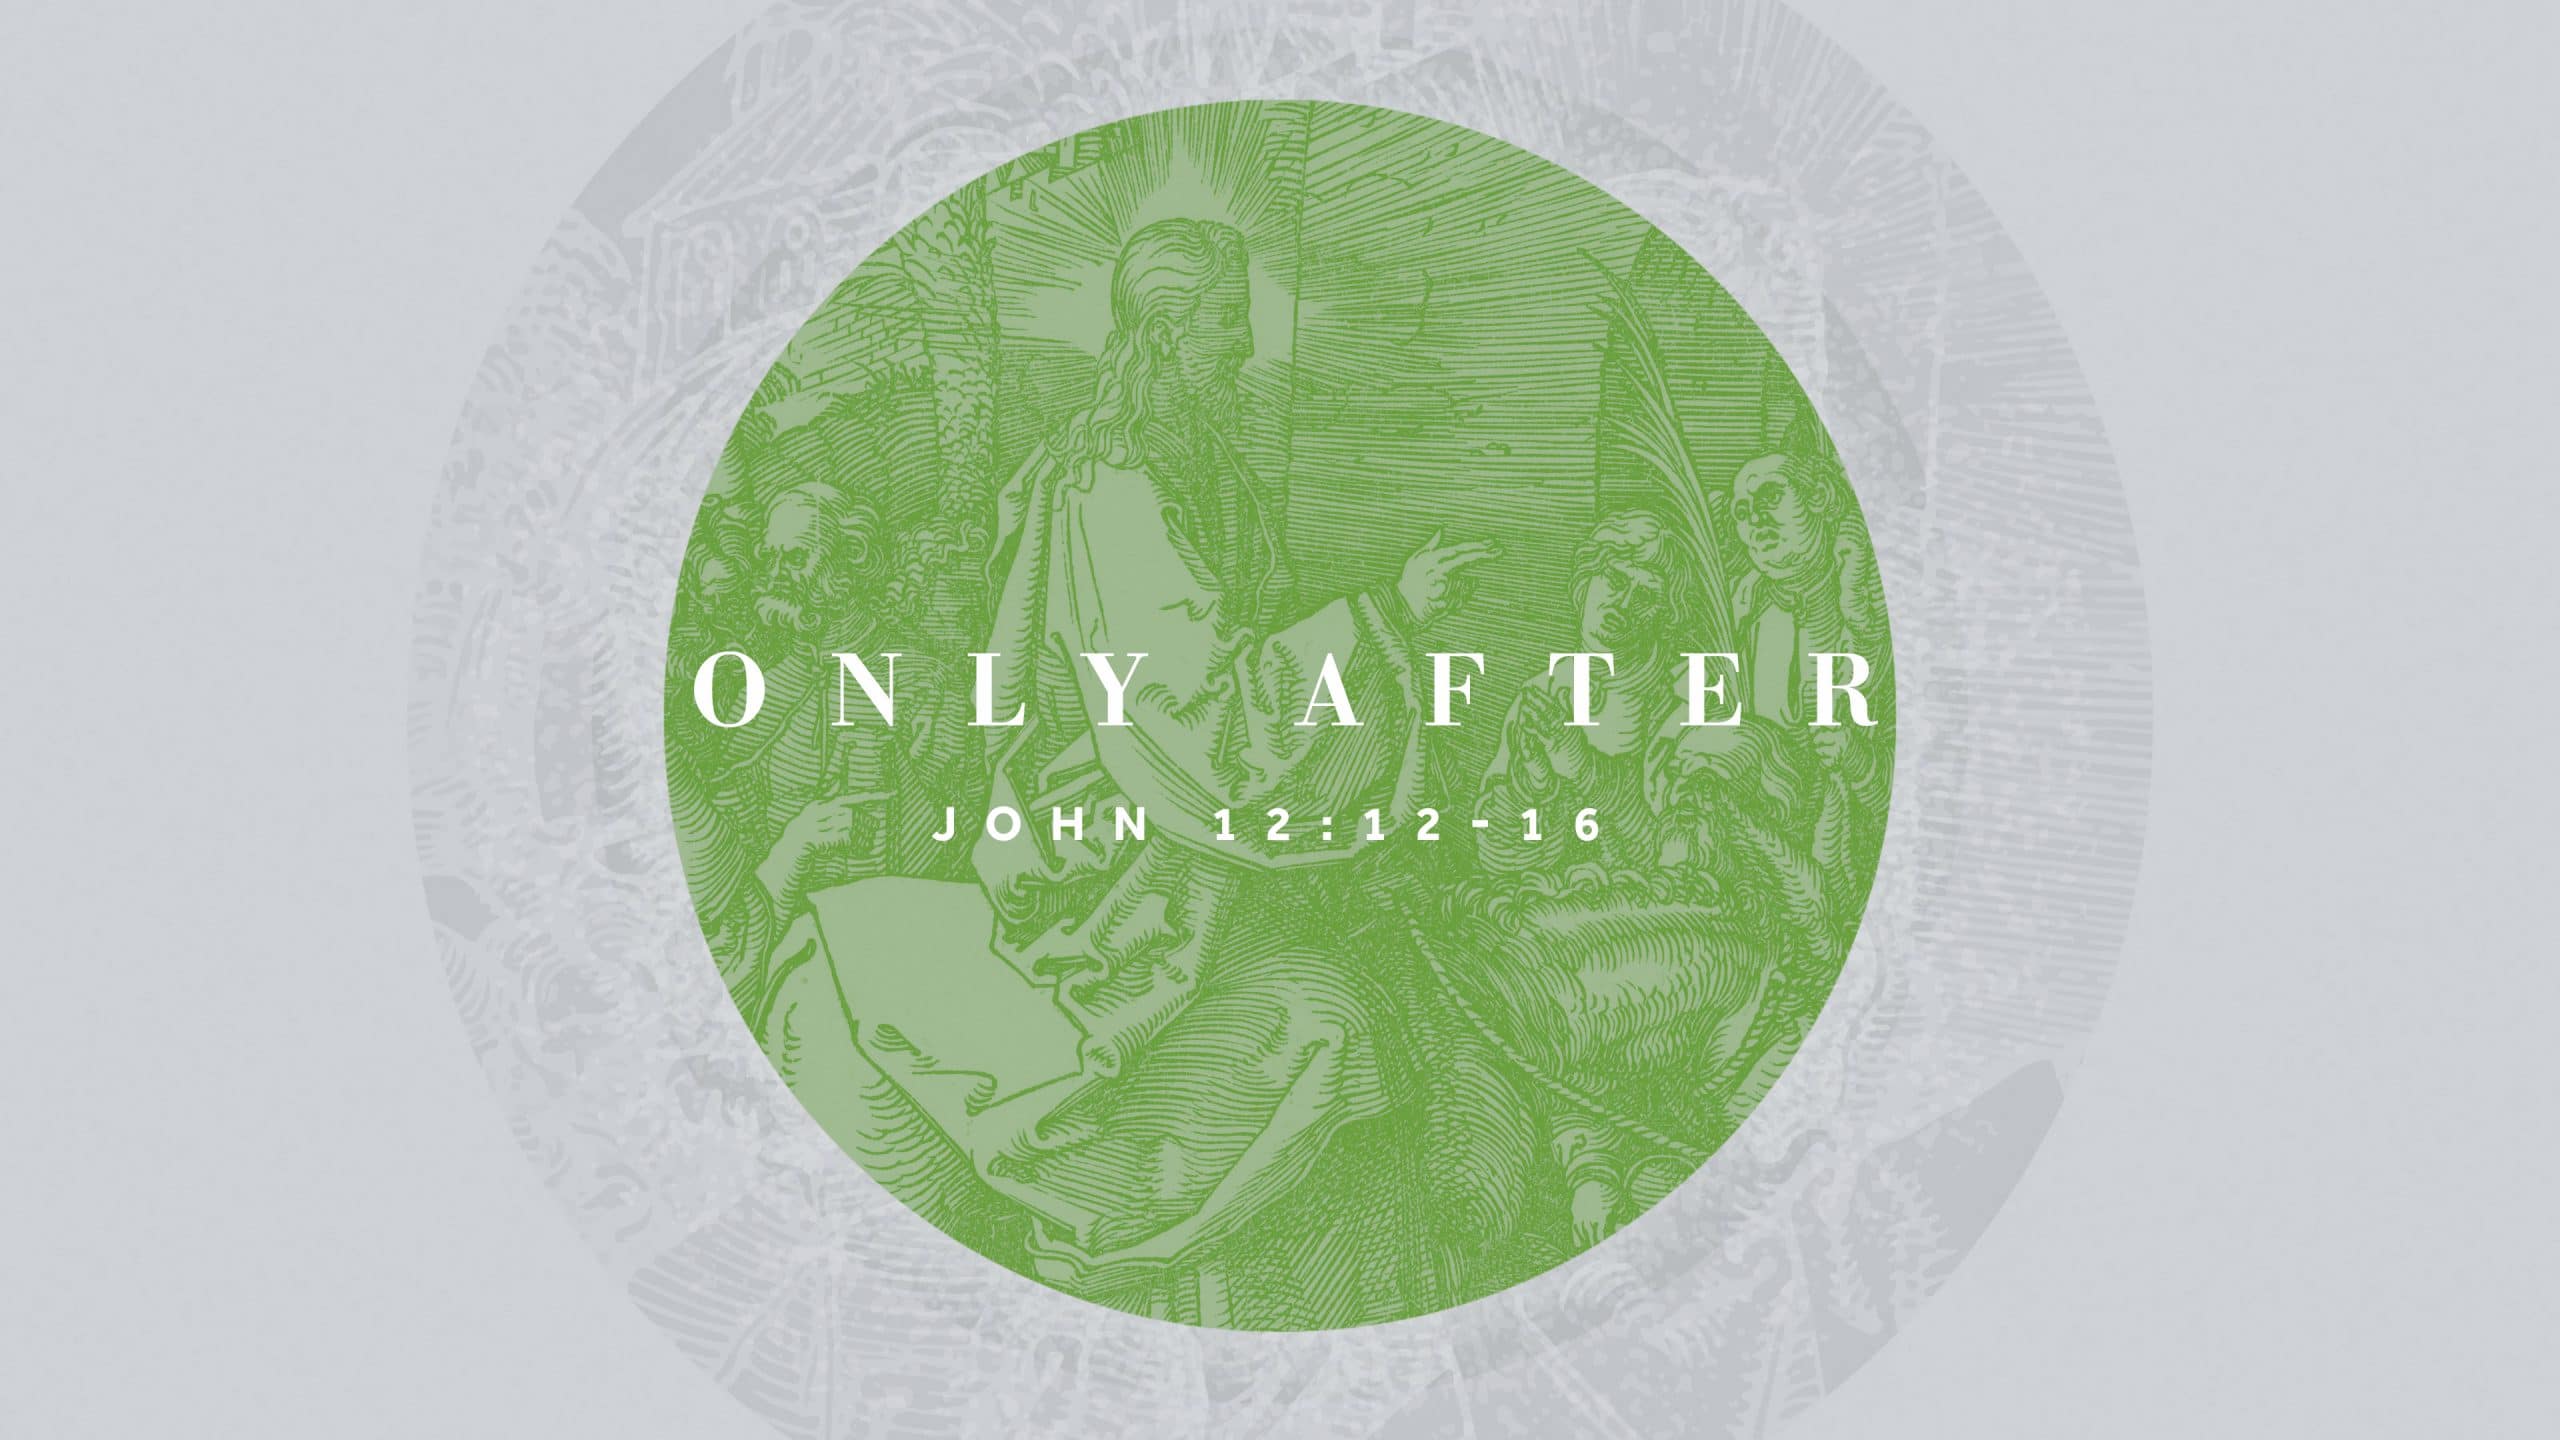 Featured image for “Only After”